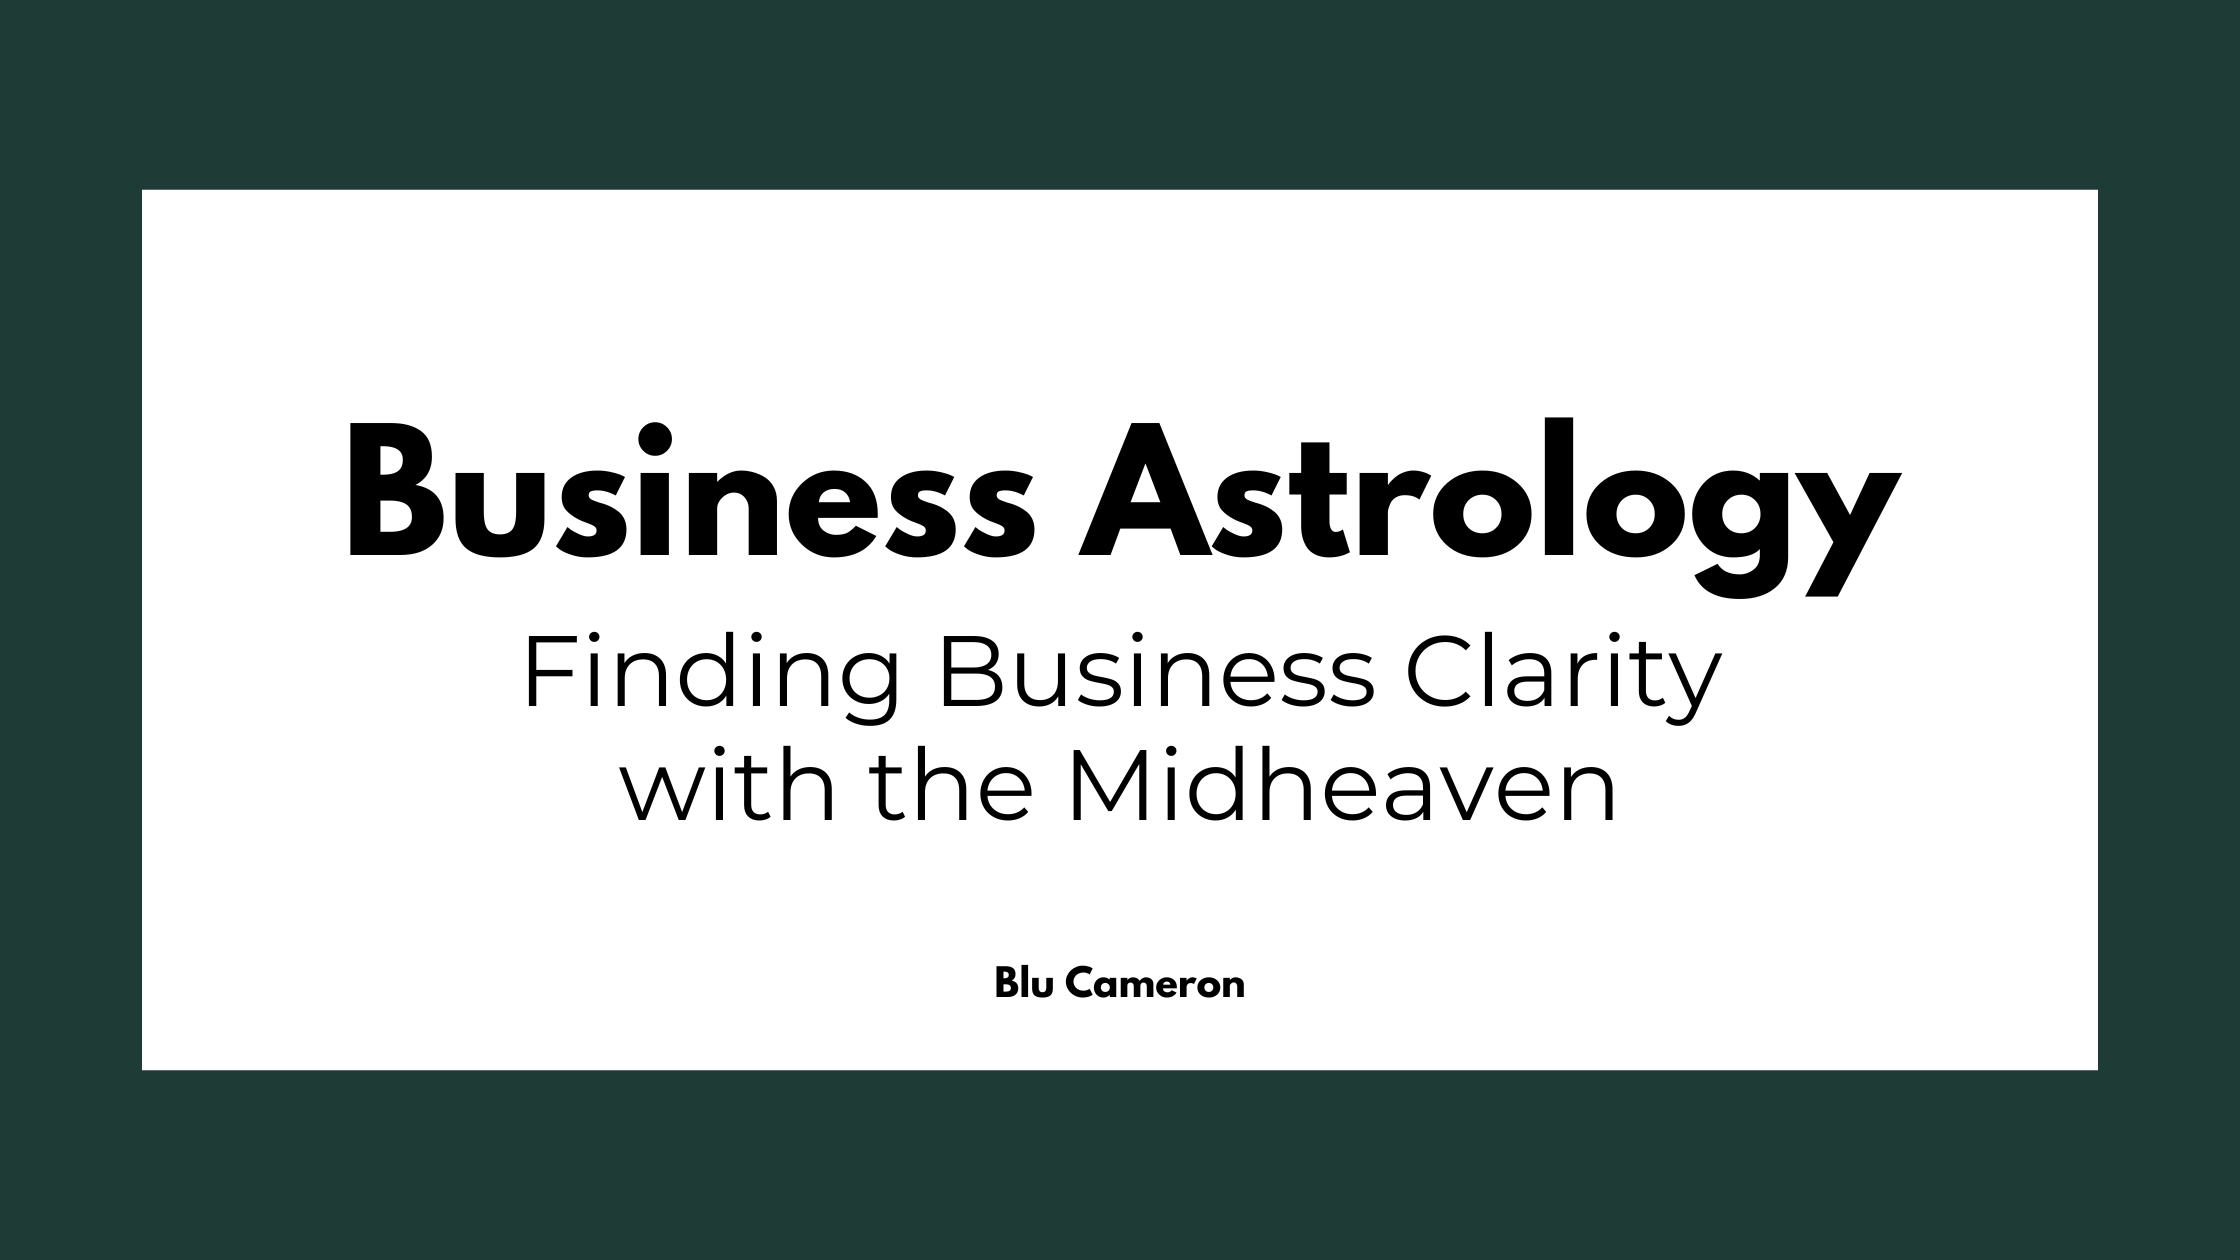 Black text against a white and green background reads: "Business Astrology, Finding Business Clarity with the Midheaven"